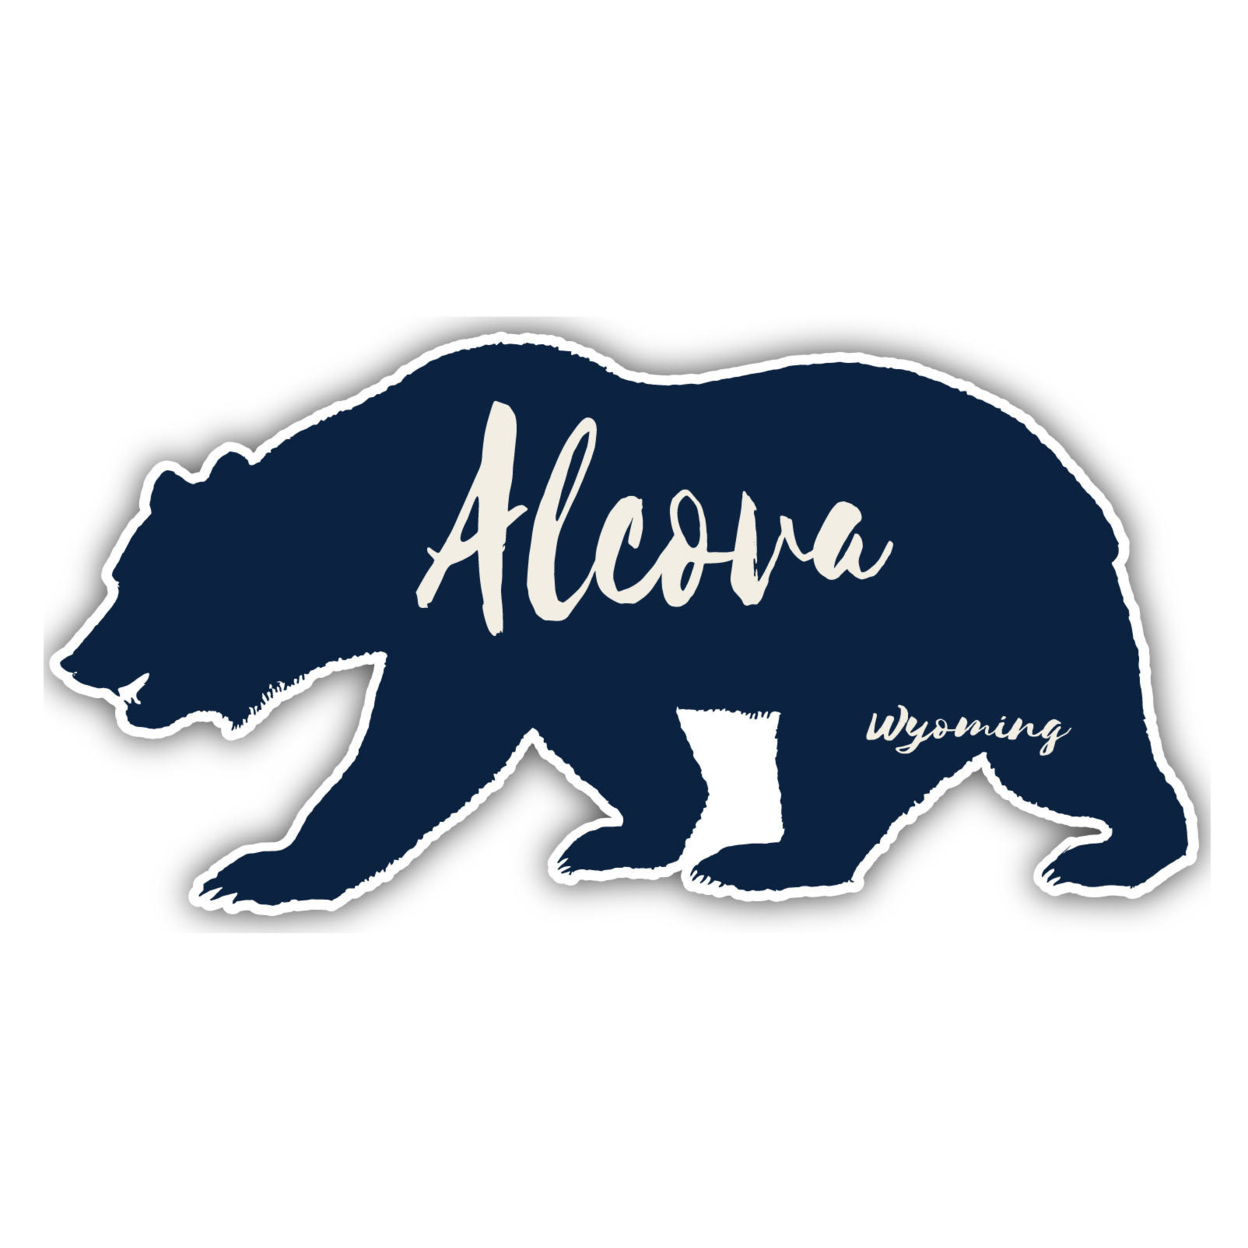 Alcova Wyoming Souvenir Decorative Stickers (Choose Theme And Size) - 4-Pack, 8-Inch, Tent